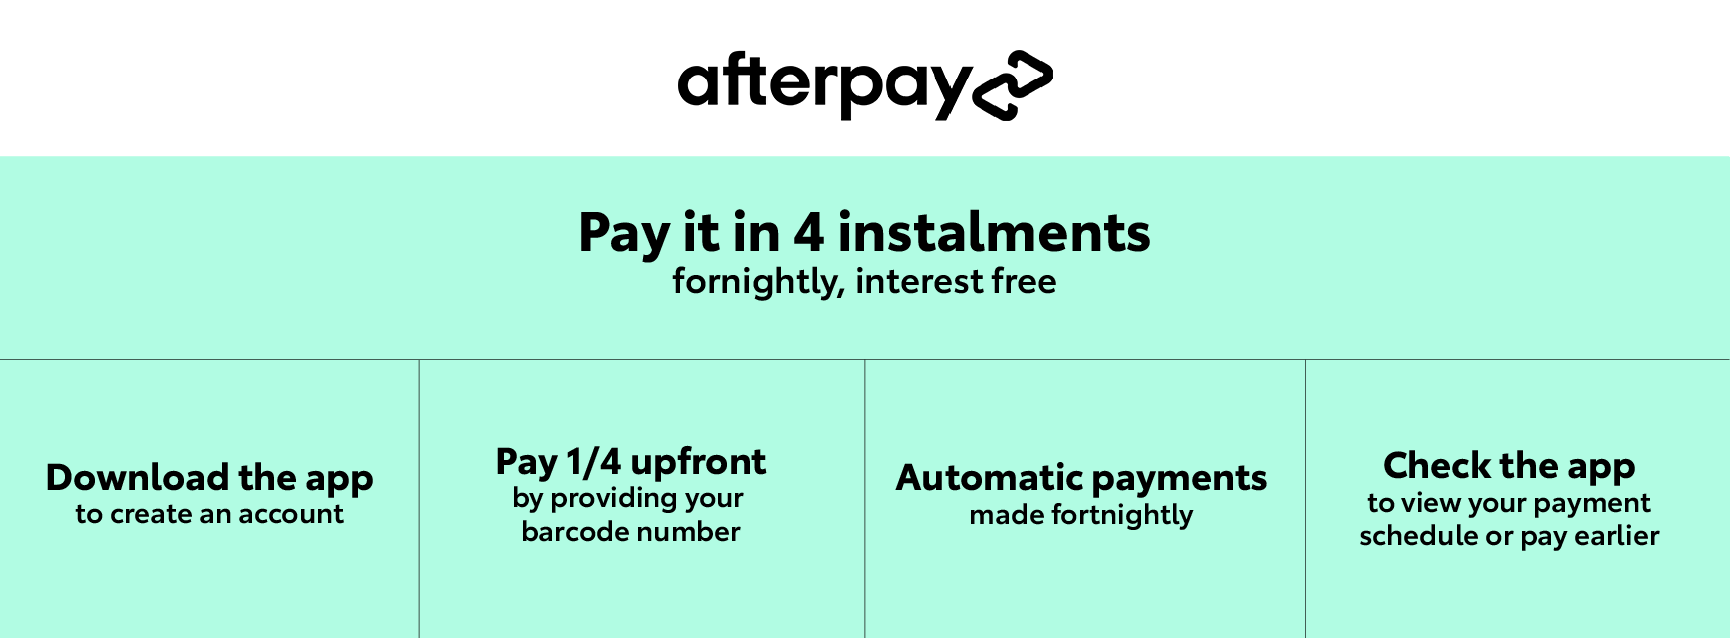 afterpay how it works.png